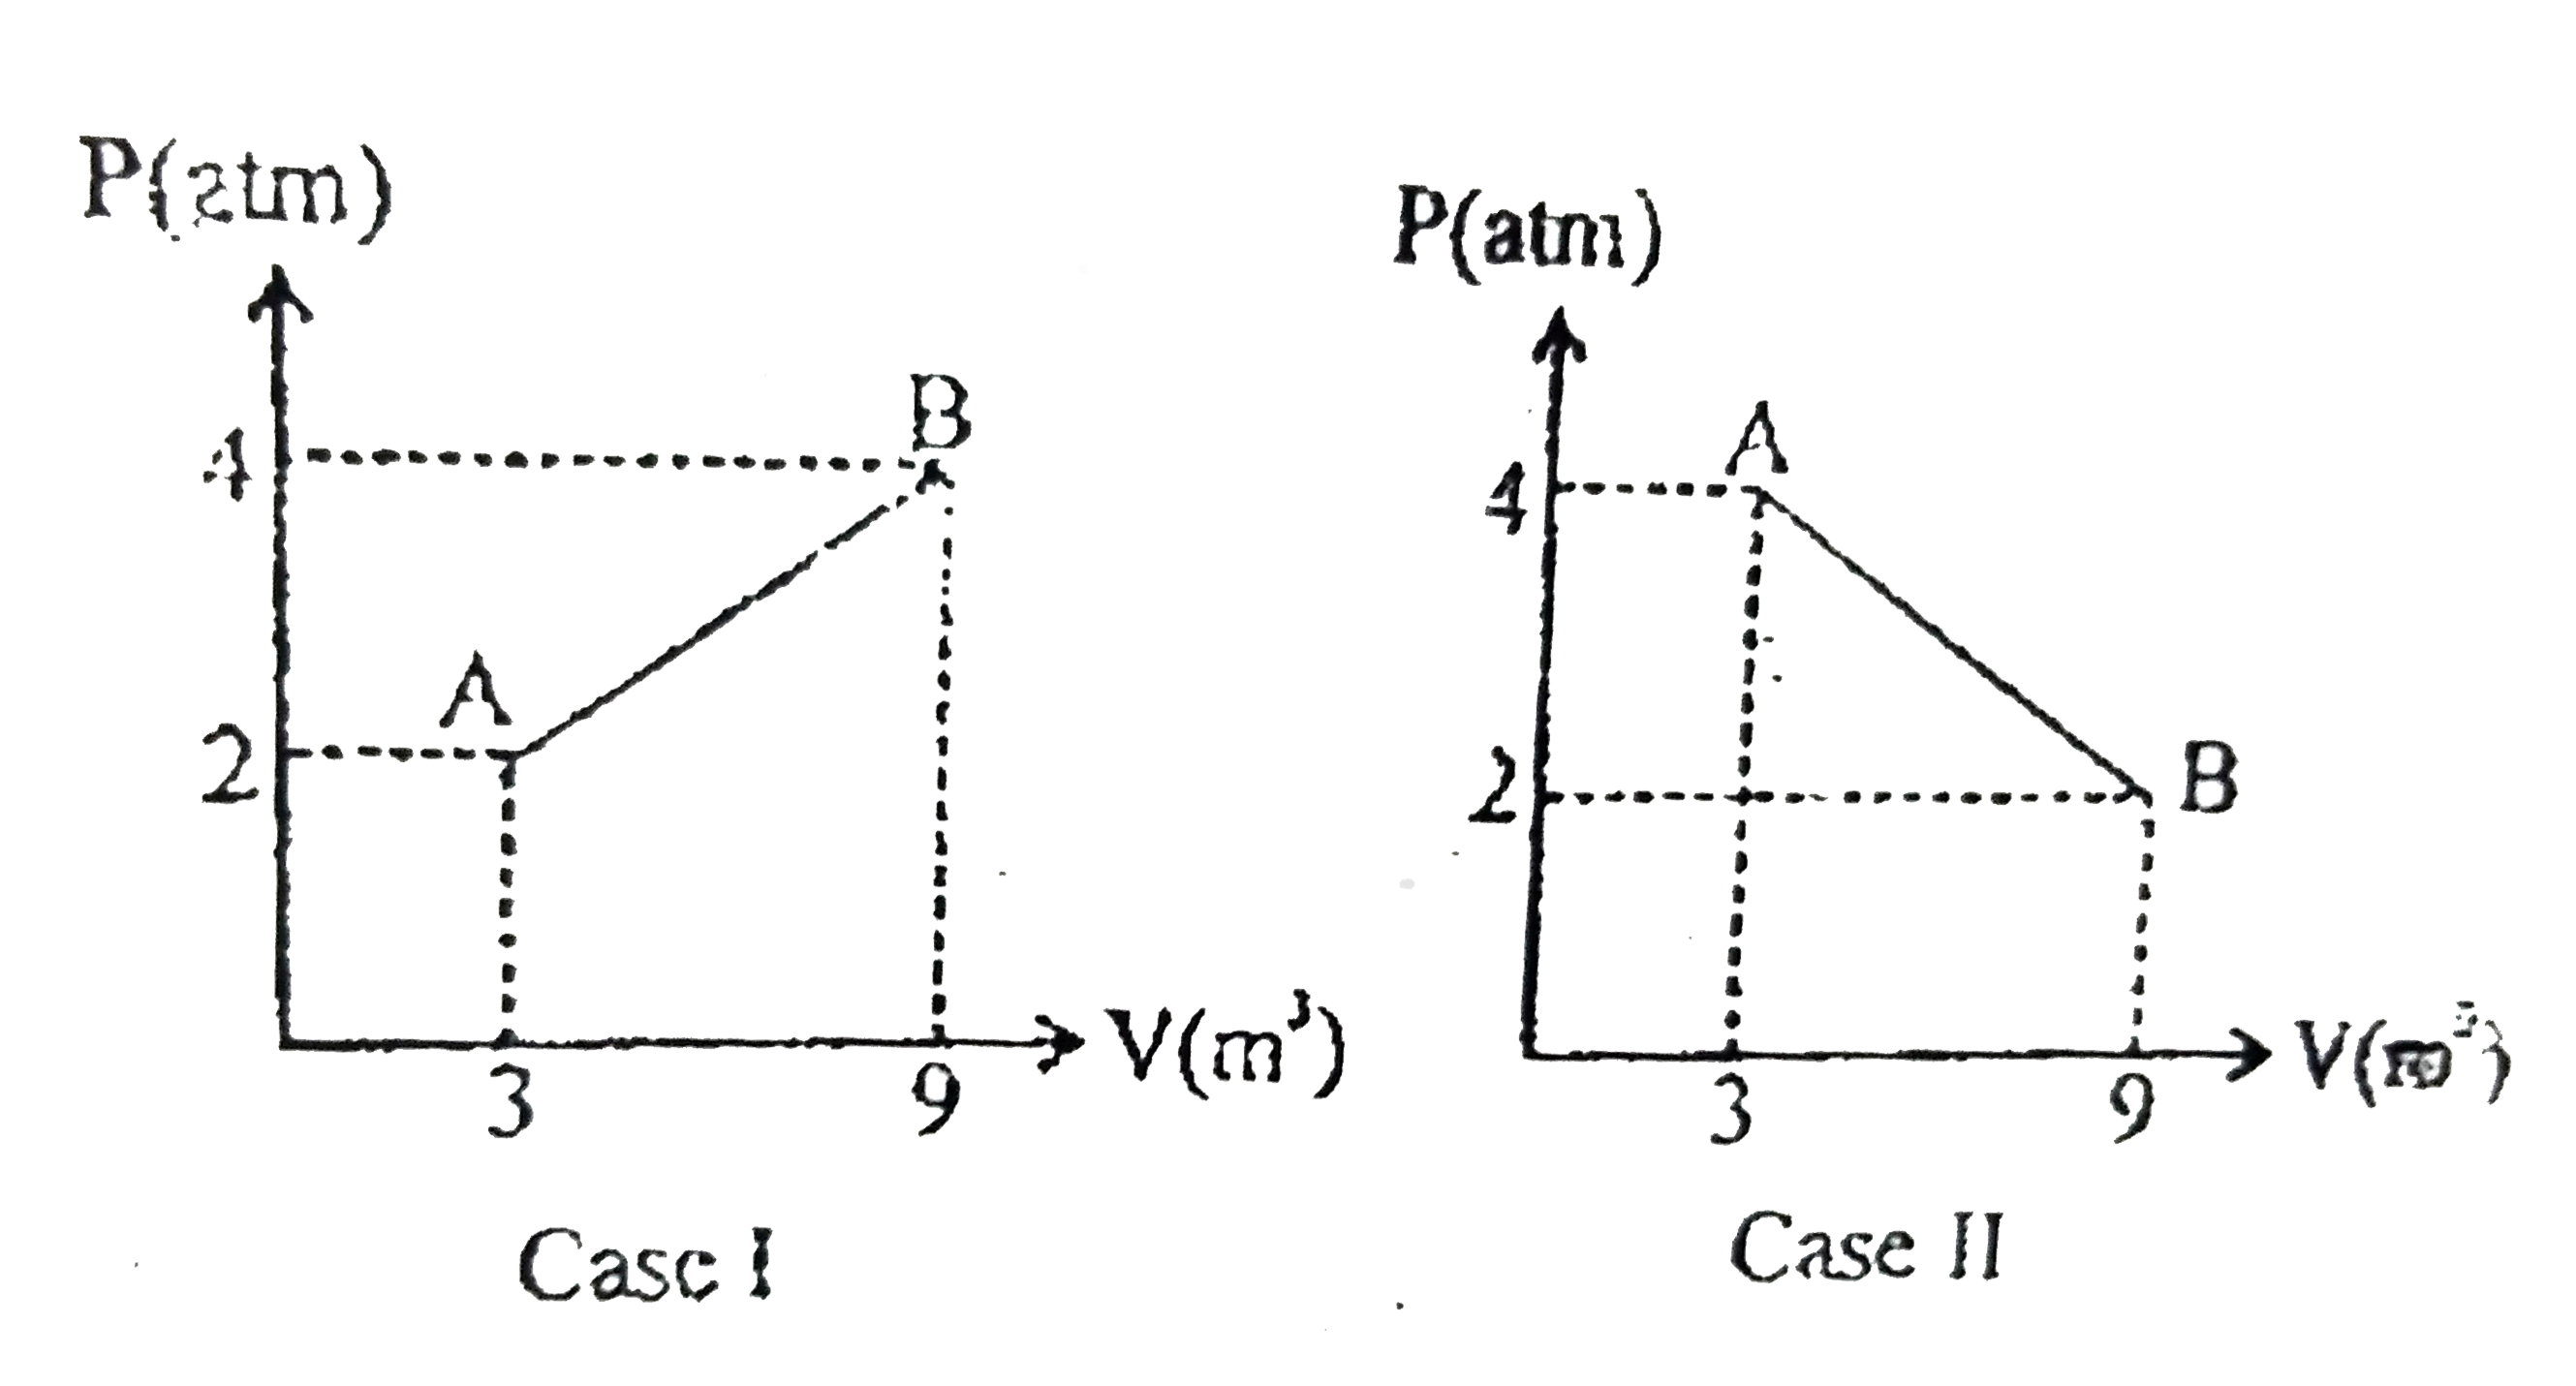 Pressure verus Volume graphs for two process for ideal gas is shown in figure. In each case state of a system is changed from A to B along the straight lines shown. In which case, will the heat added to the system be more?